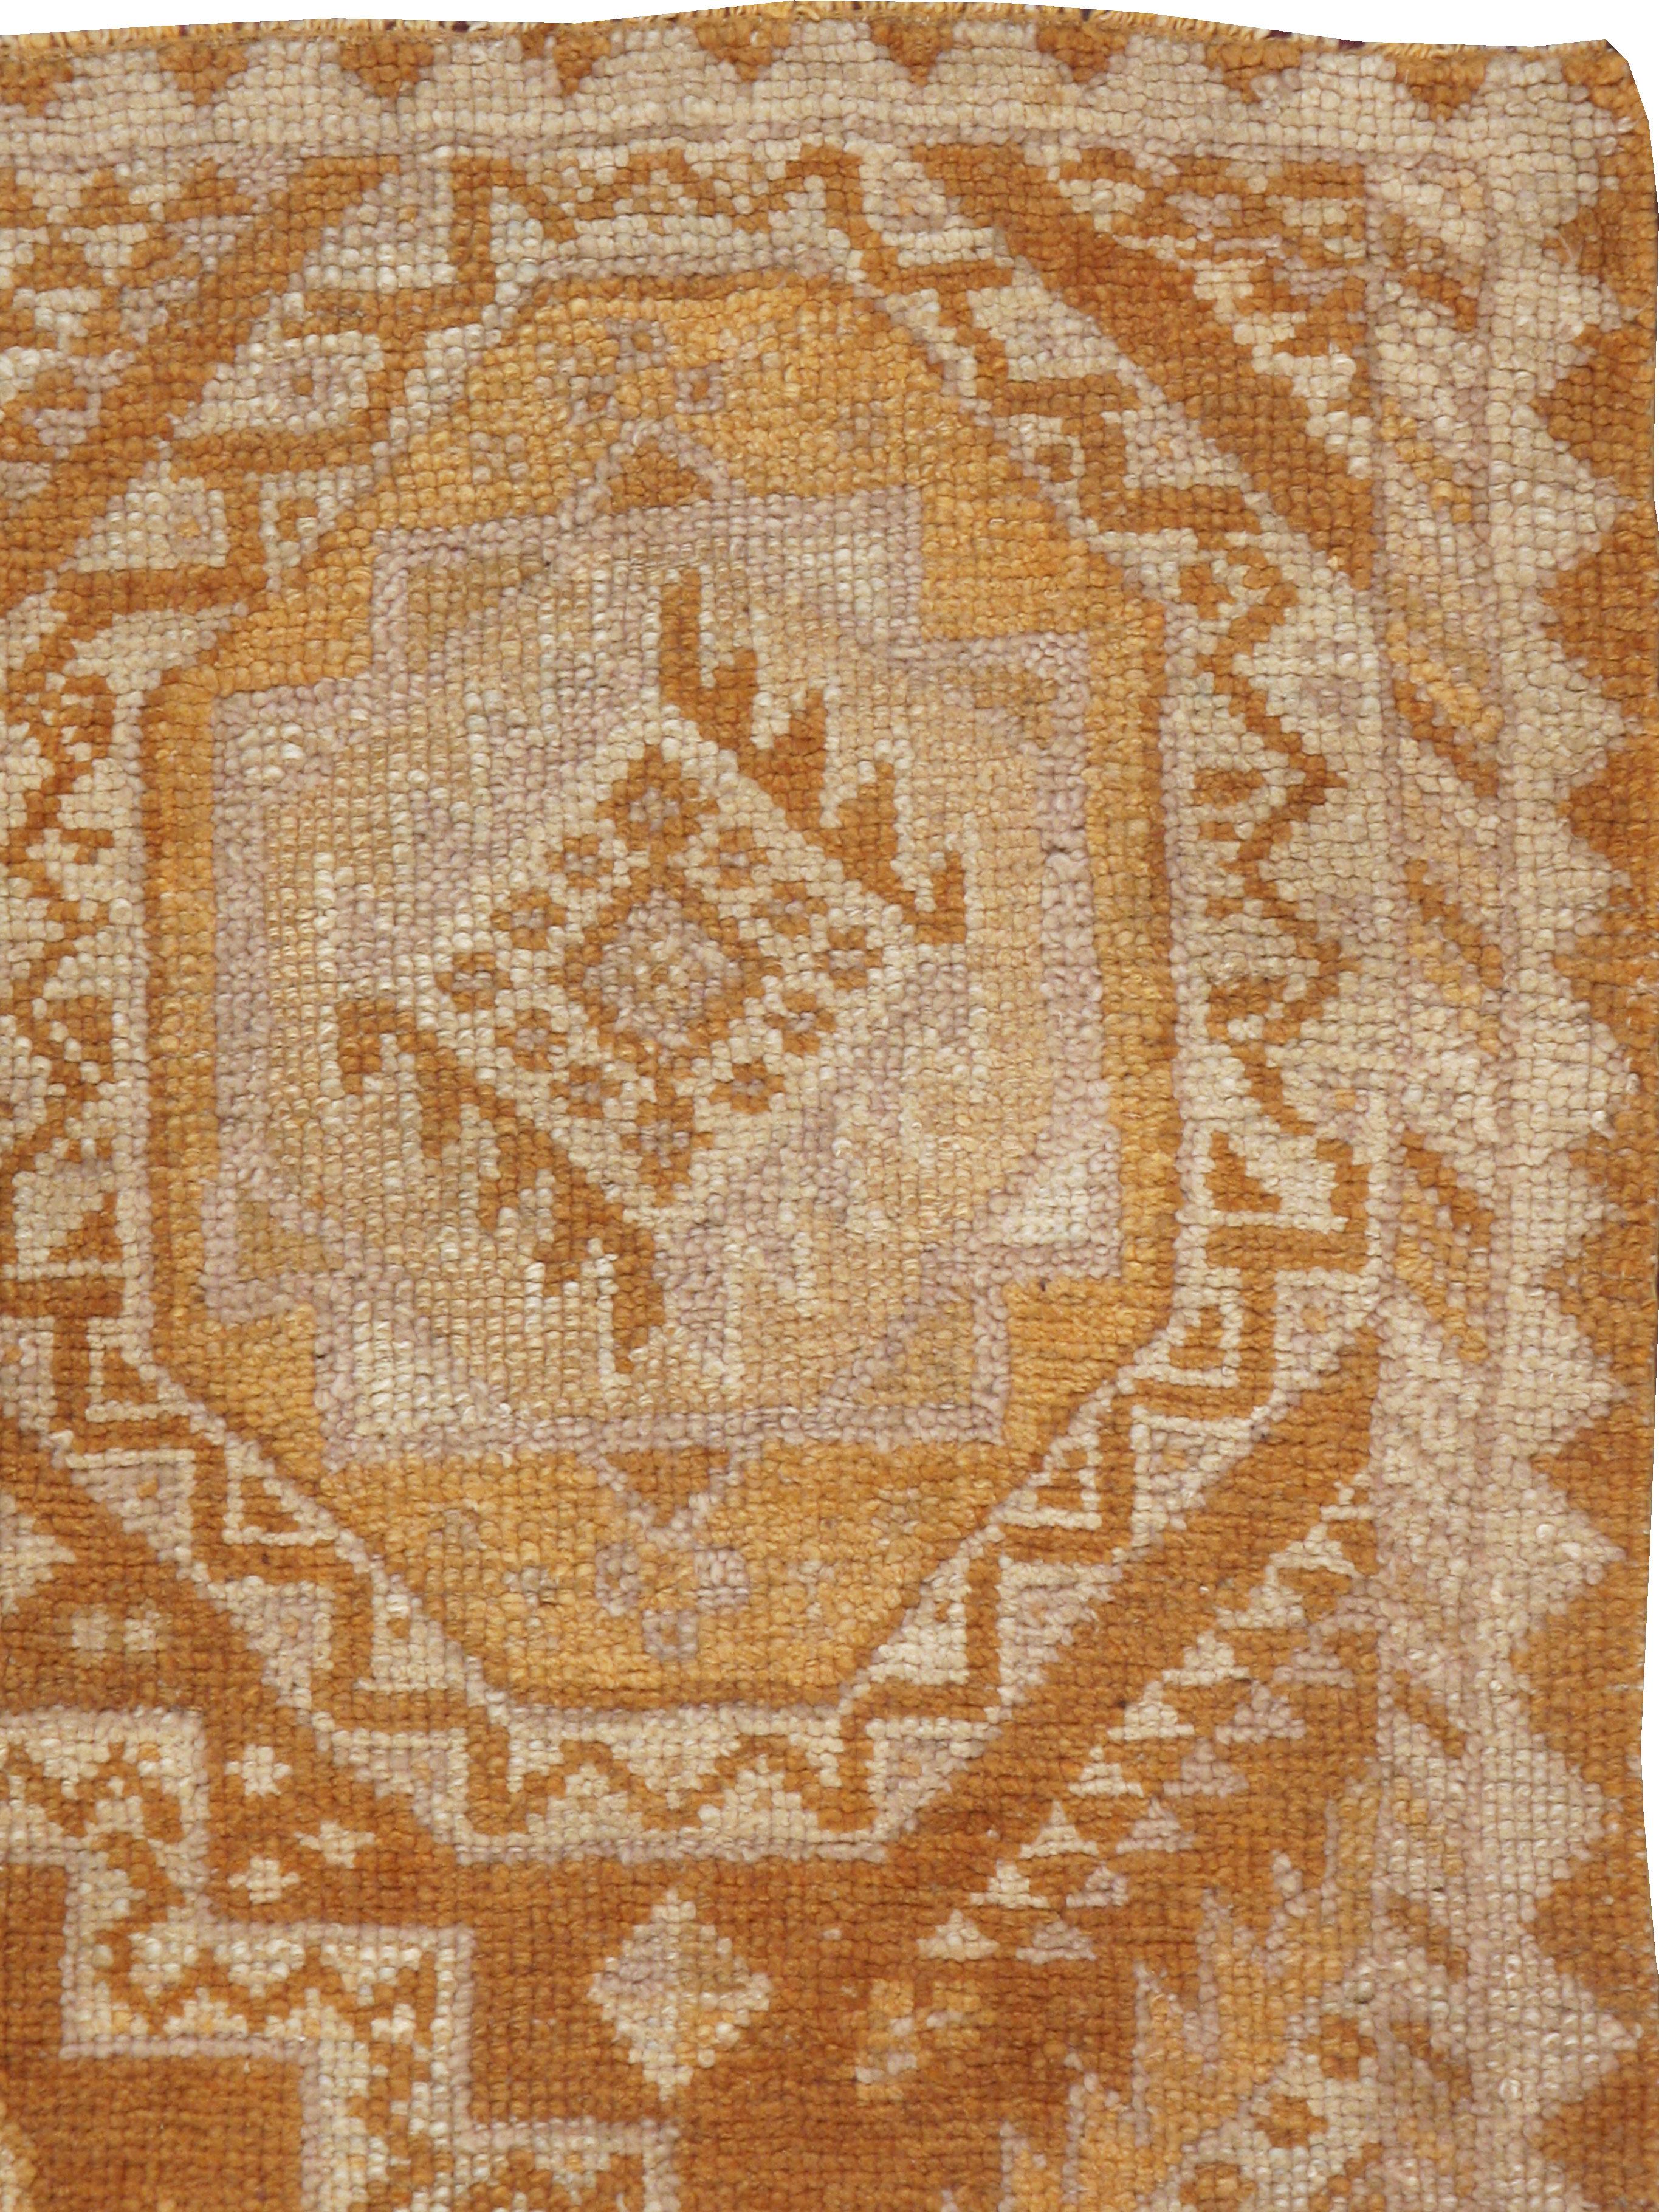 A vintage Turkish Oushak rug from the mid-20th century. A stepped central cross is closely fitted into a field with four enormous octagons and lateral sawtooth triangles in this vintage rug. The pattern is incredibly strong, but the soft rust and